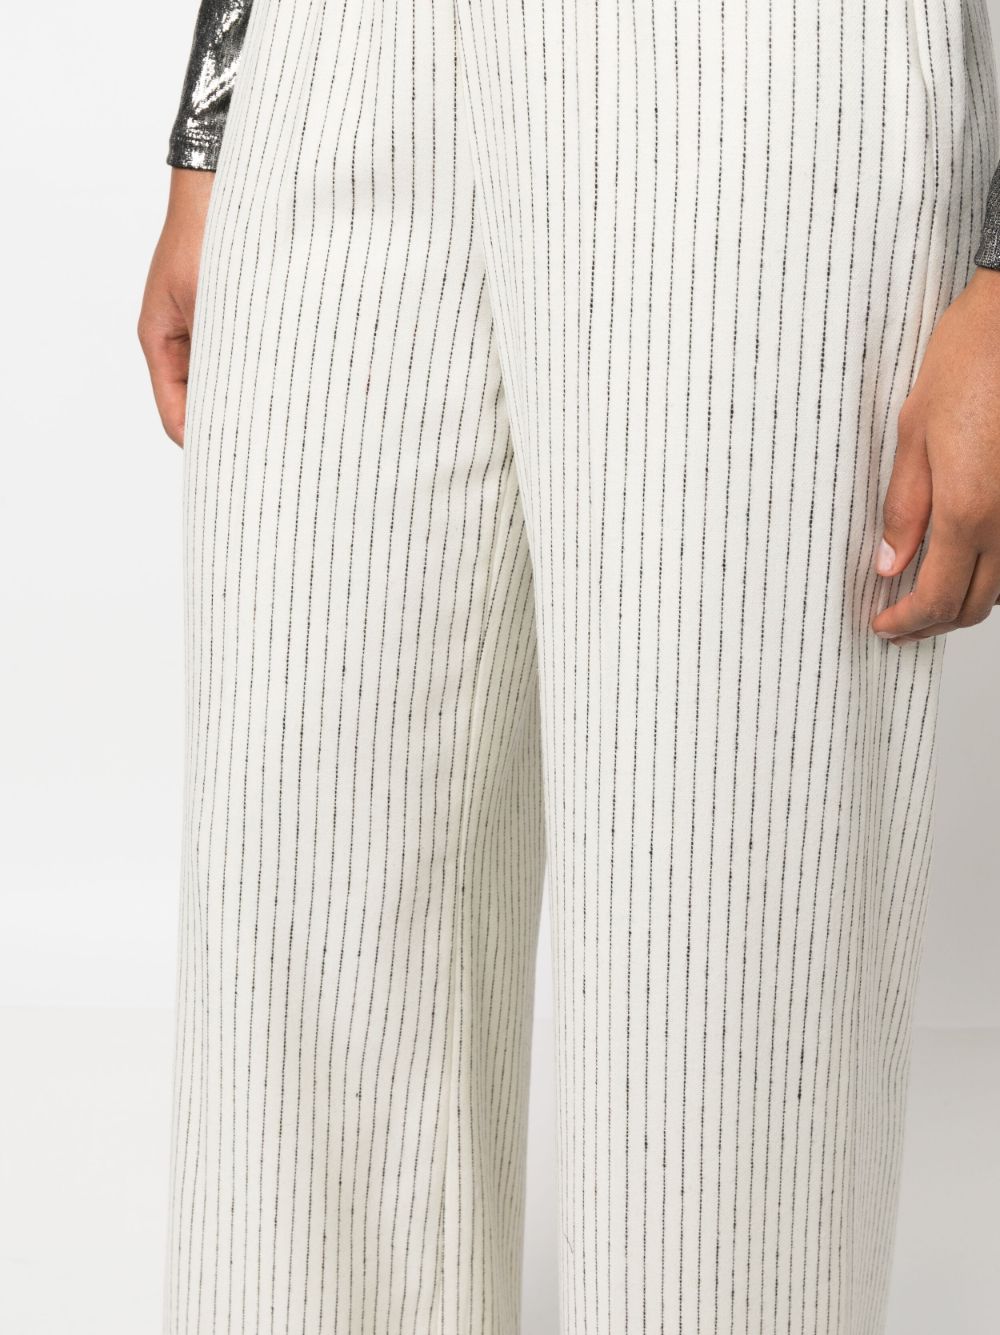 Forte Forte Trousers White